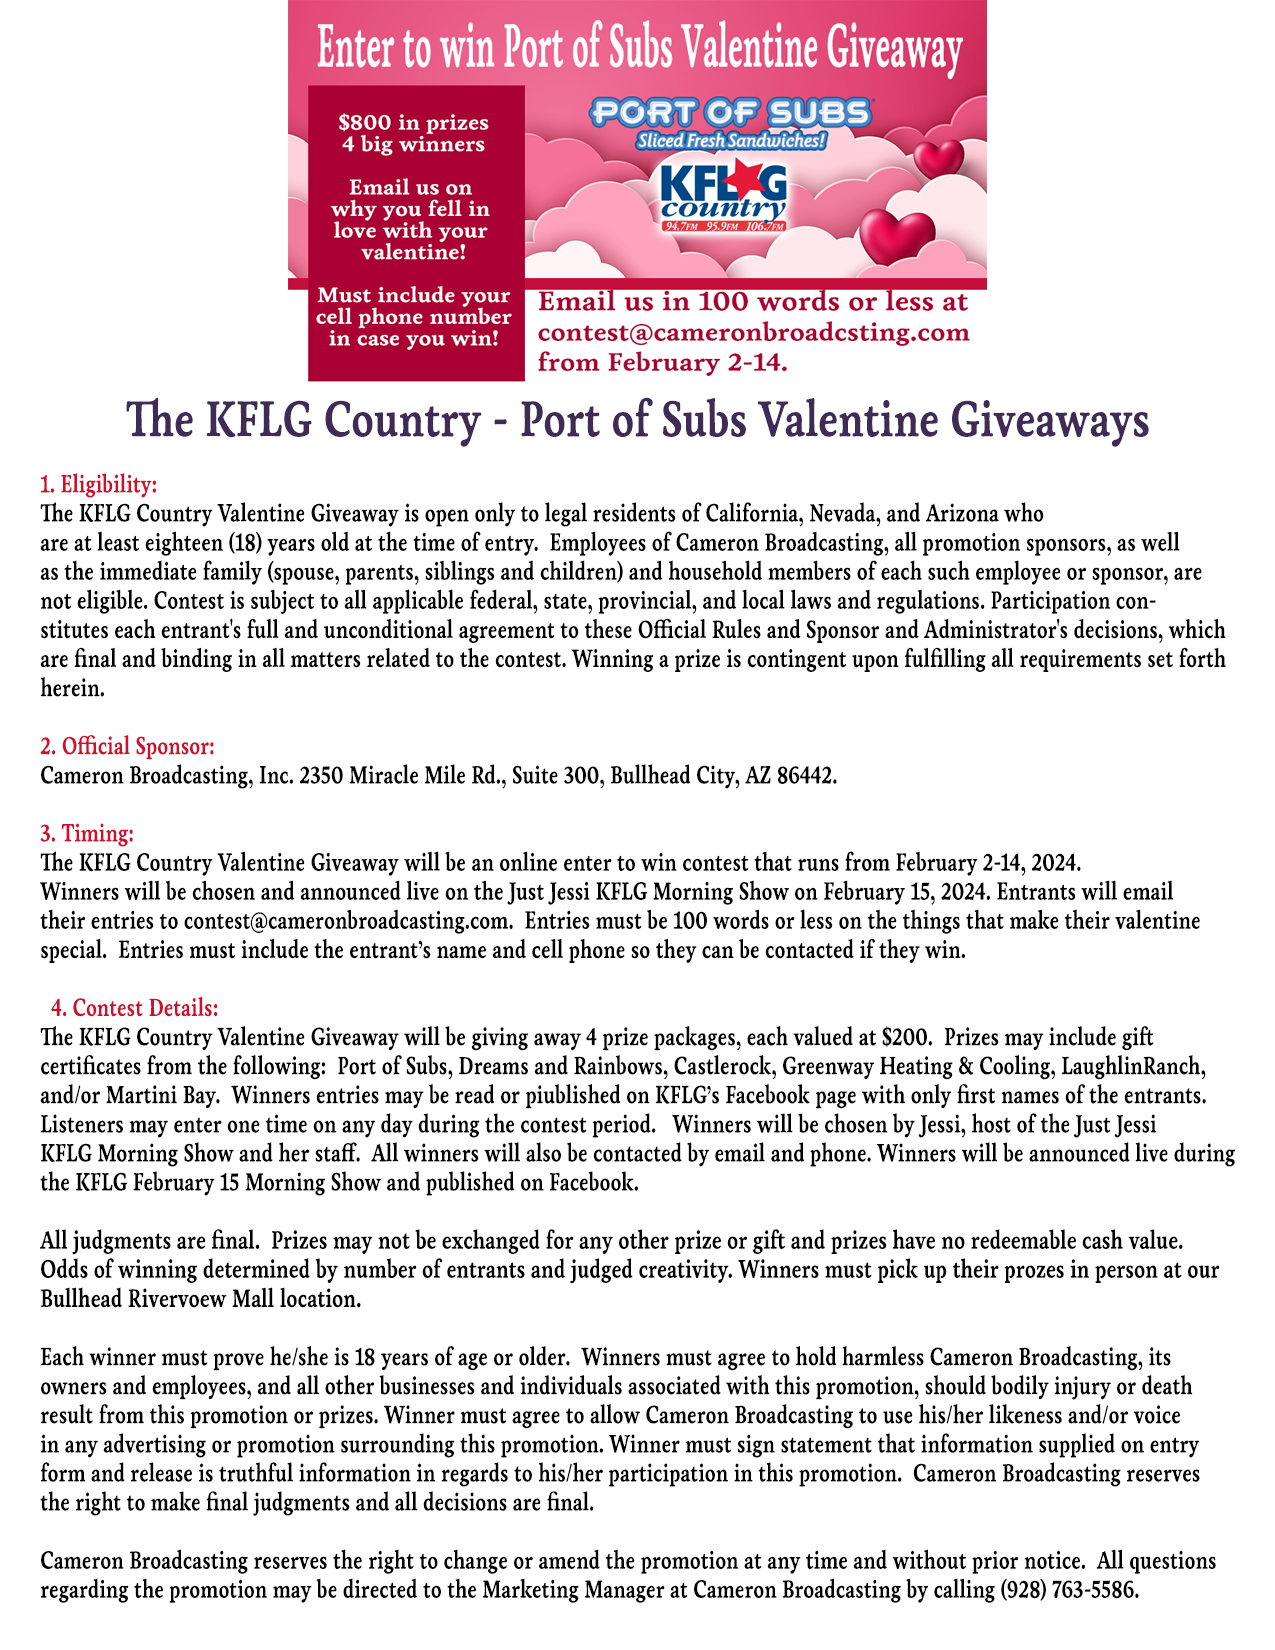 The KFLG Country - Port of Subs Valentine Giveaways